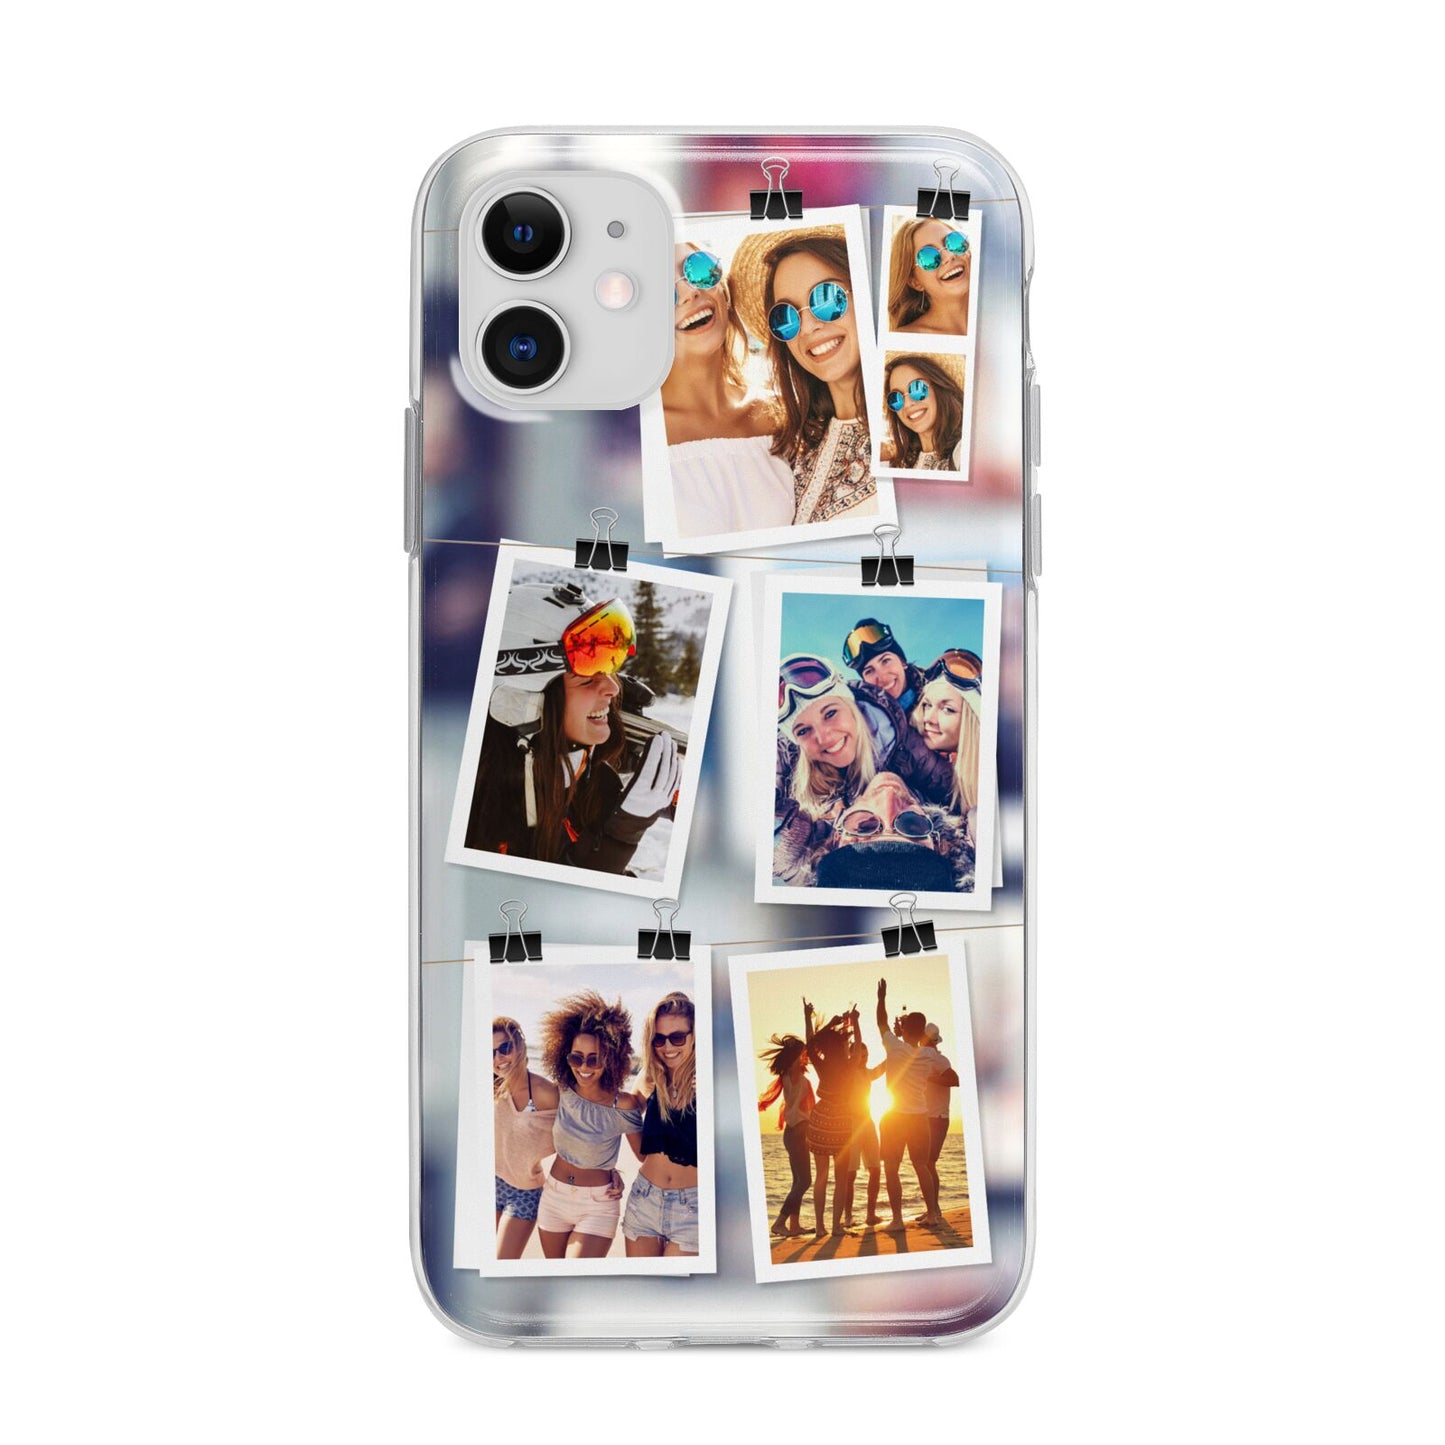 Photo Wall Montage Upload Apple iPhone 11 in White with Bumper Case